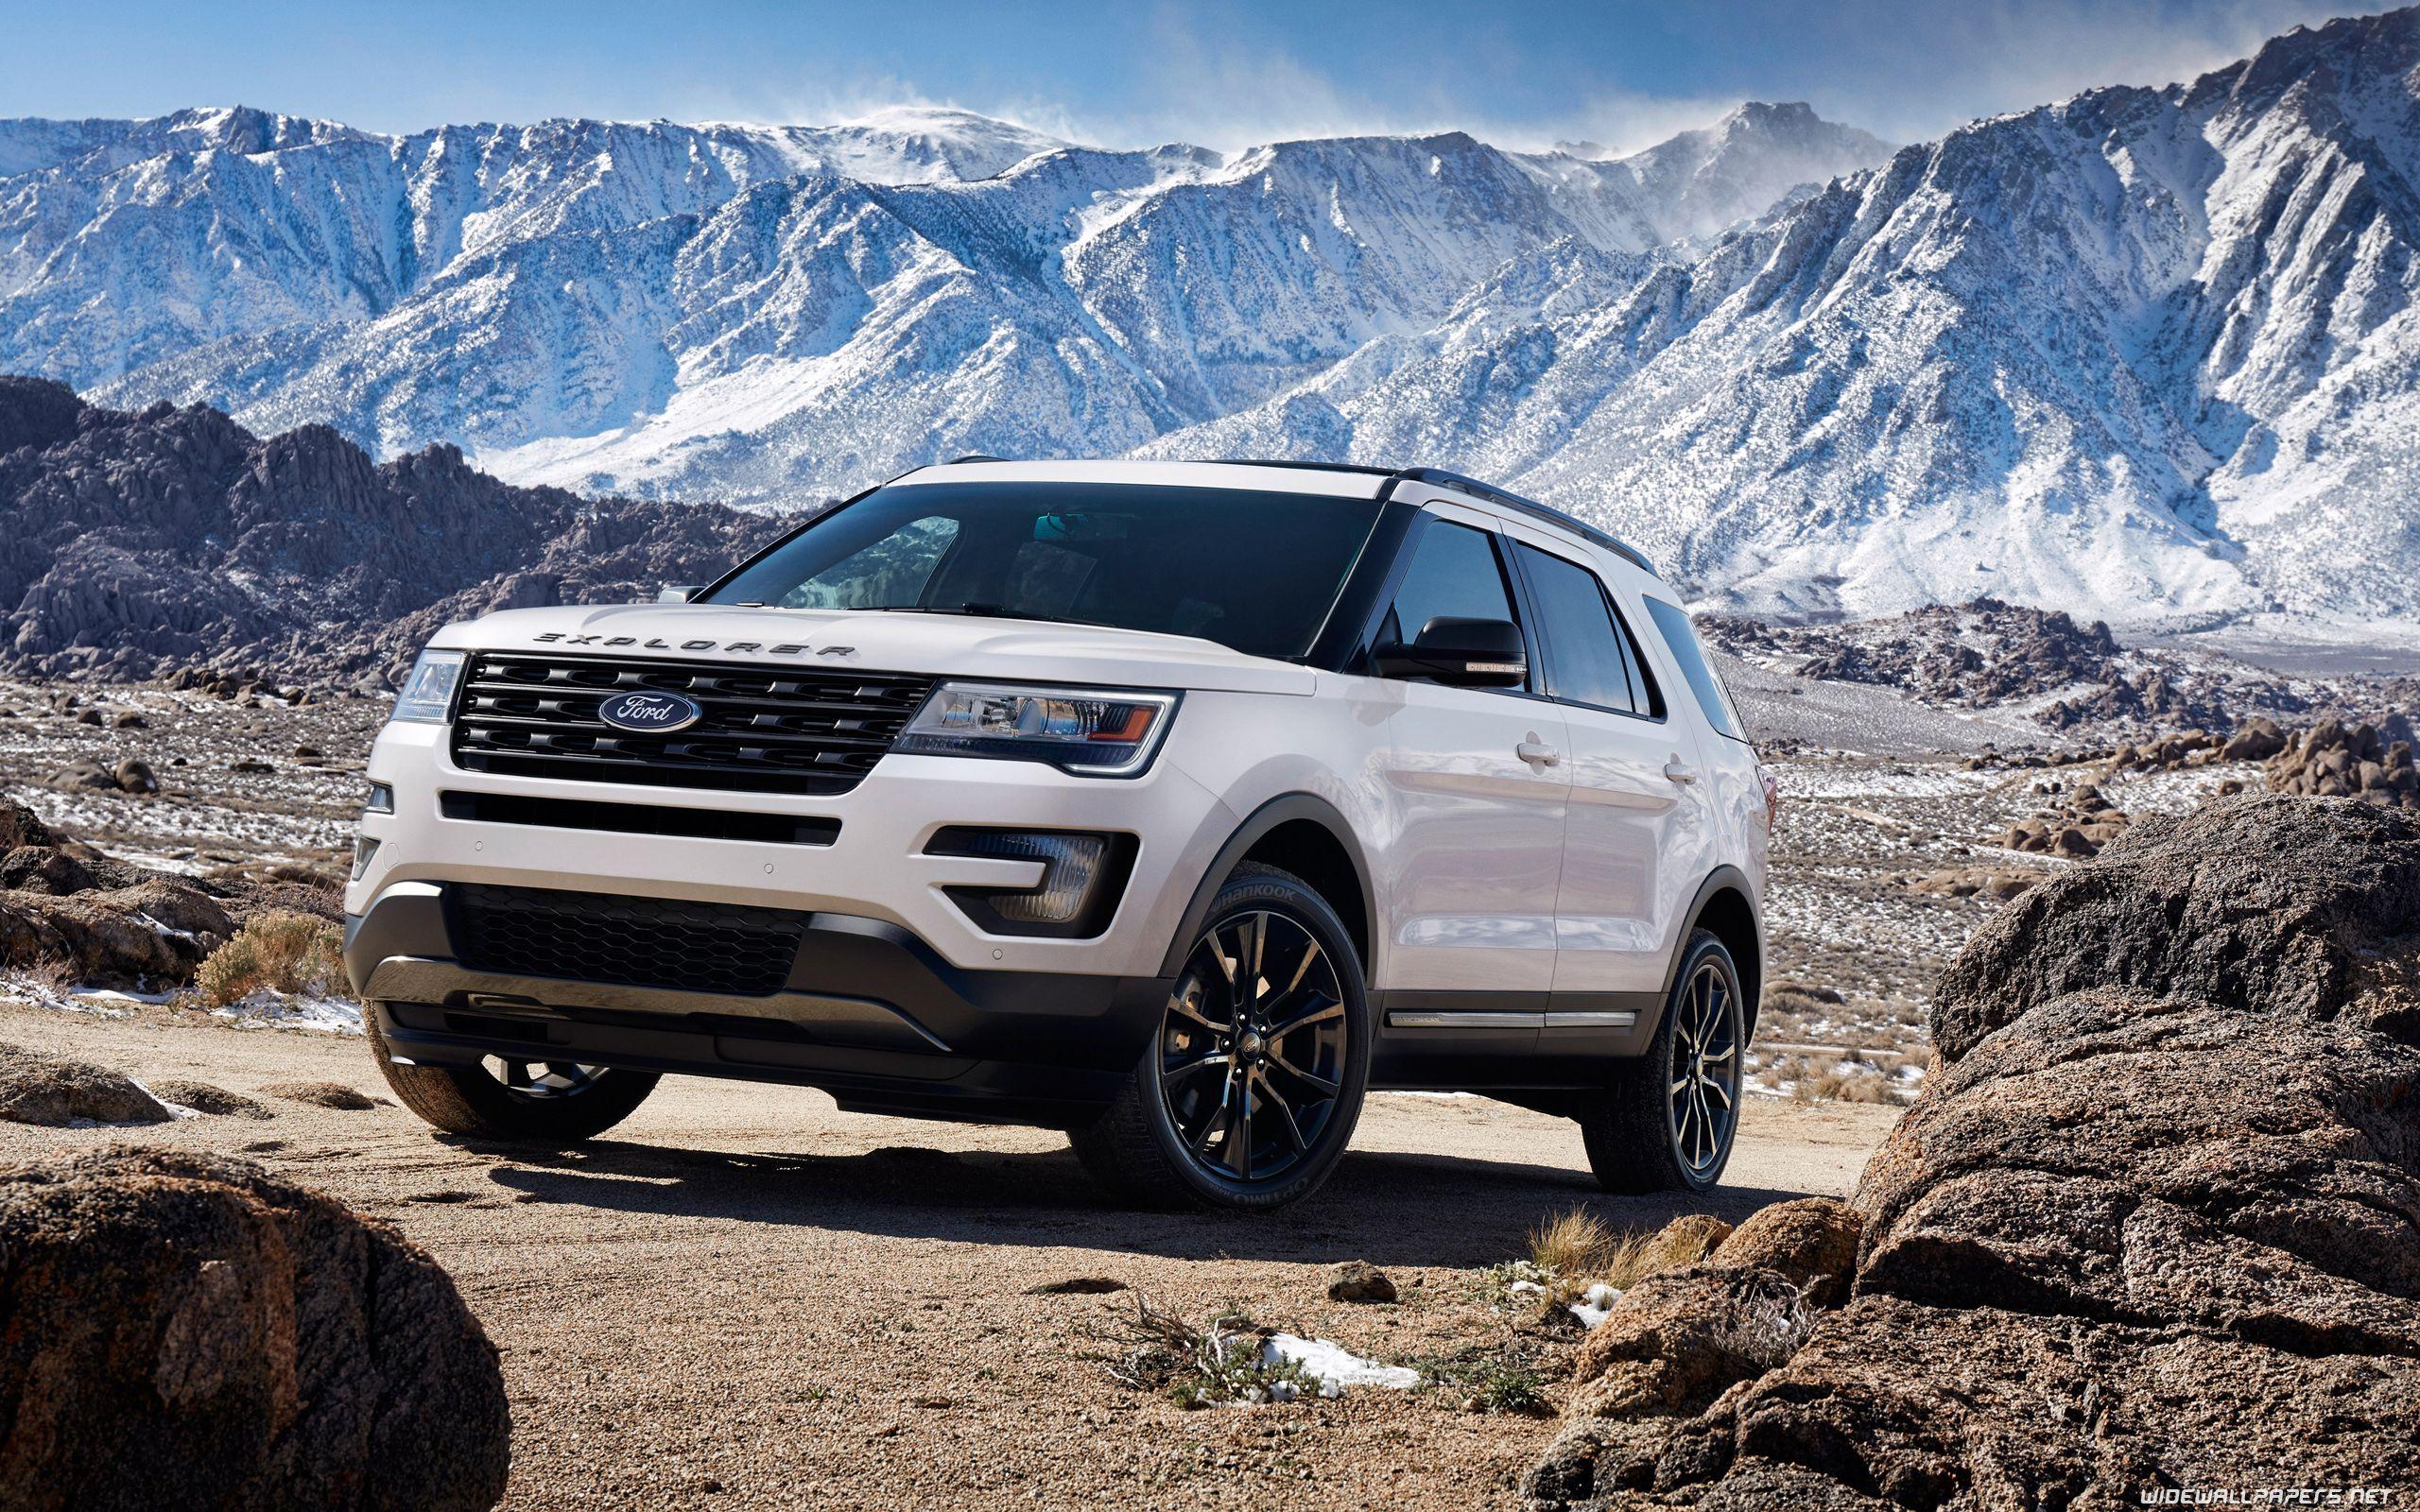 Ford Explorer Wallpapers Top Free Ford Explorer Backgrounds Wallpaperaccess